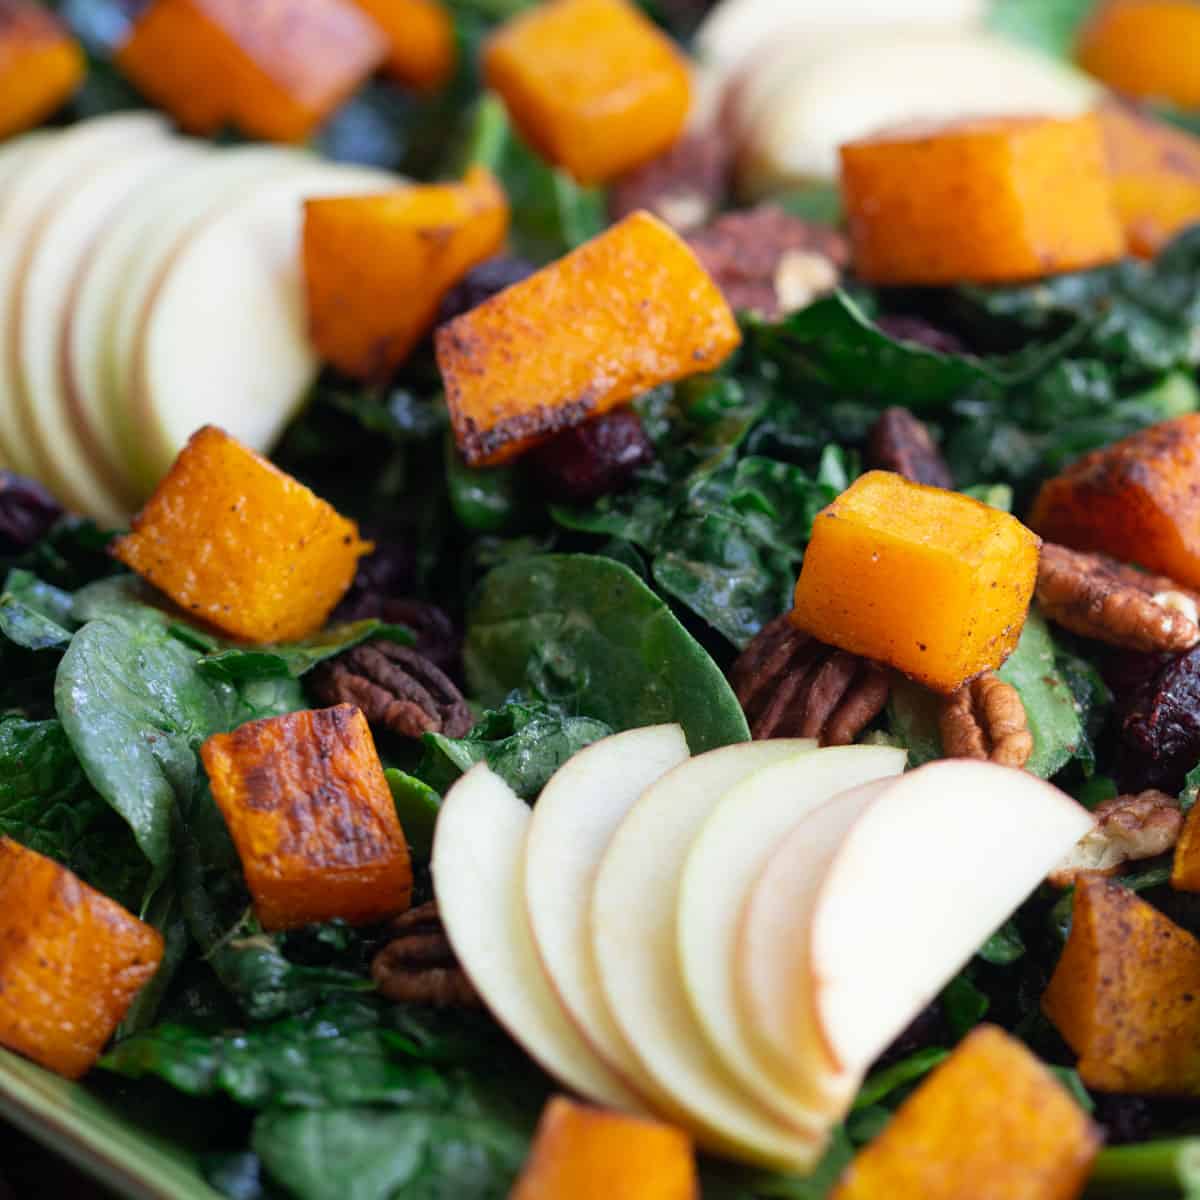 Fall kale salad with apples and butternut squash.
